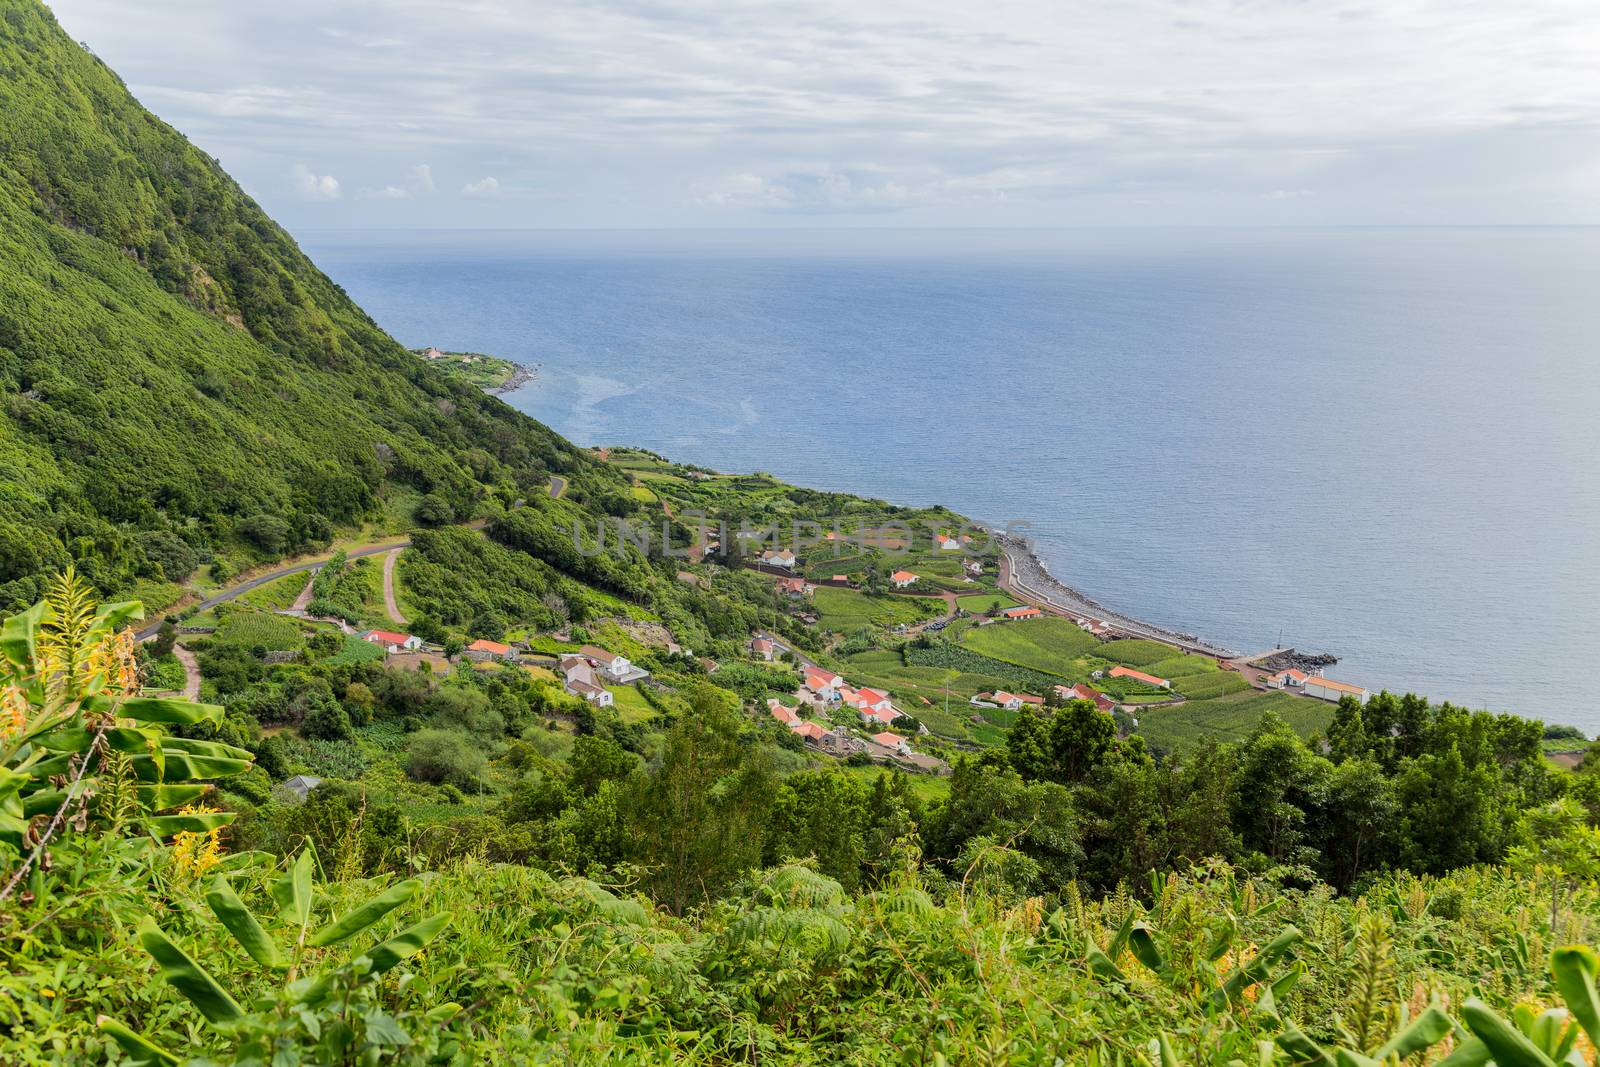 Sao Jorge countryside by zittto